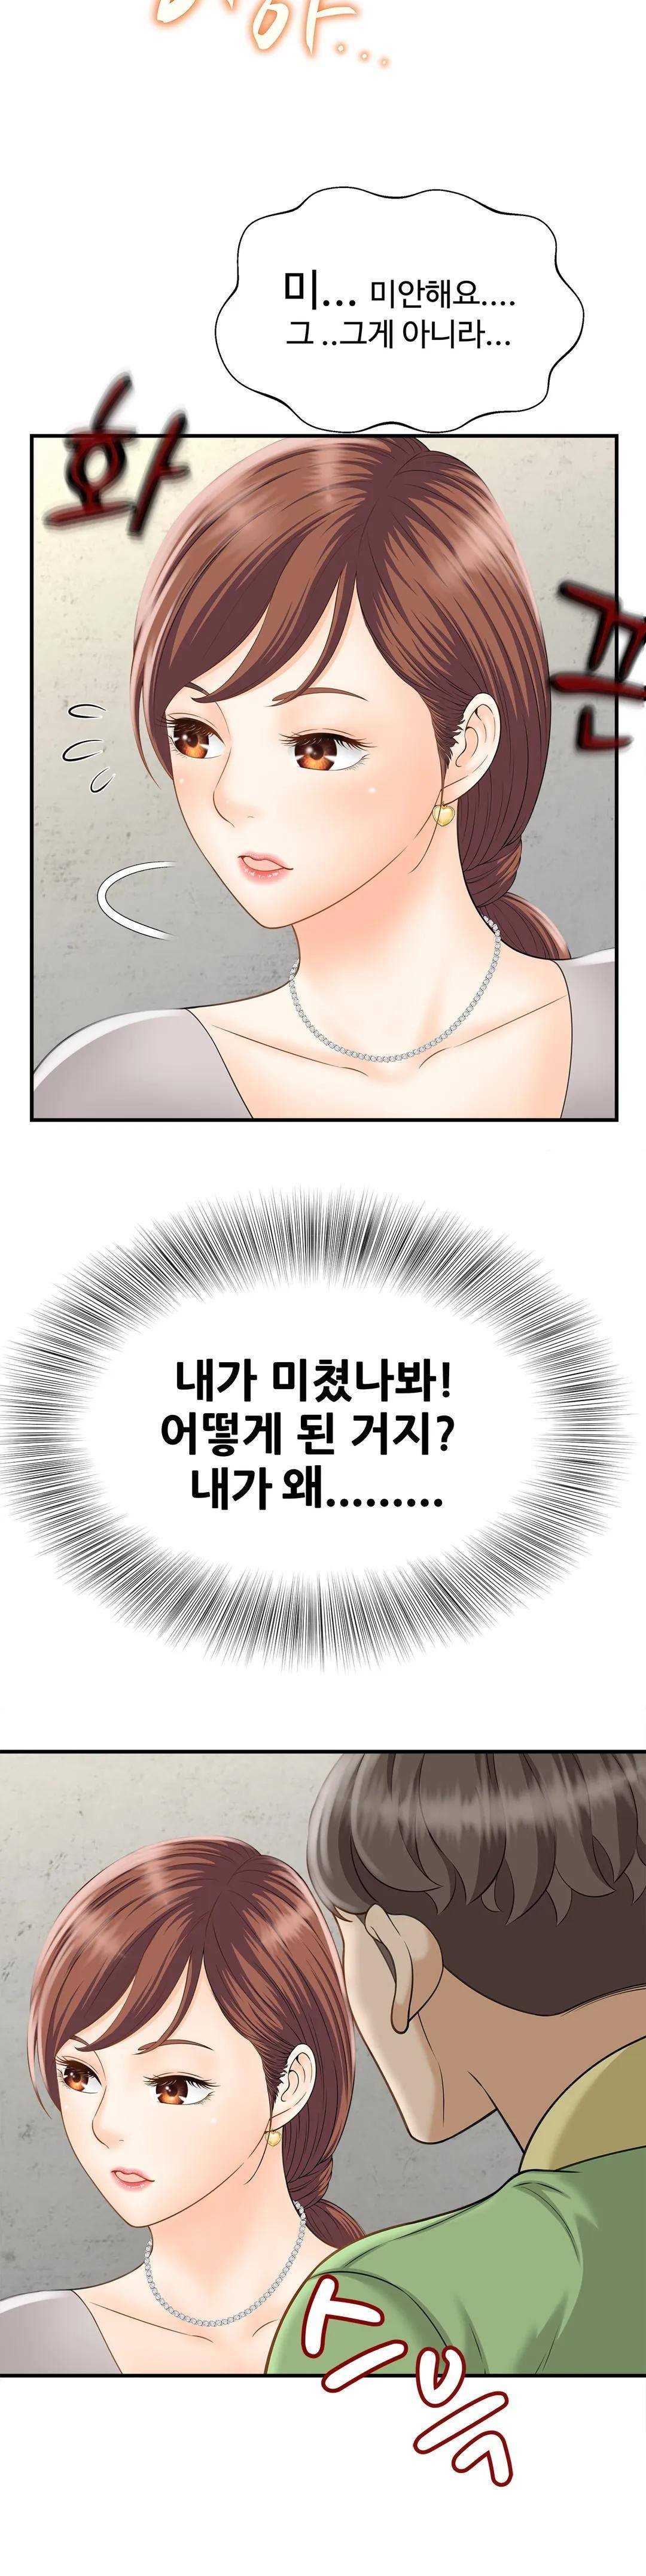 the-hunt-for-married-women-raw-chap-3-25